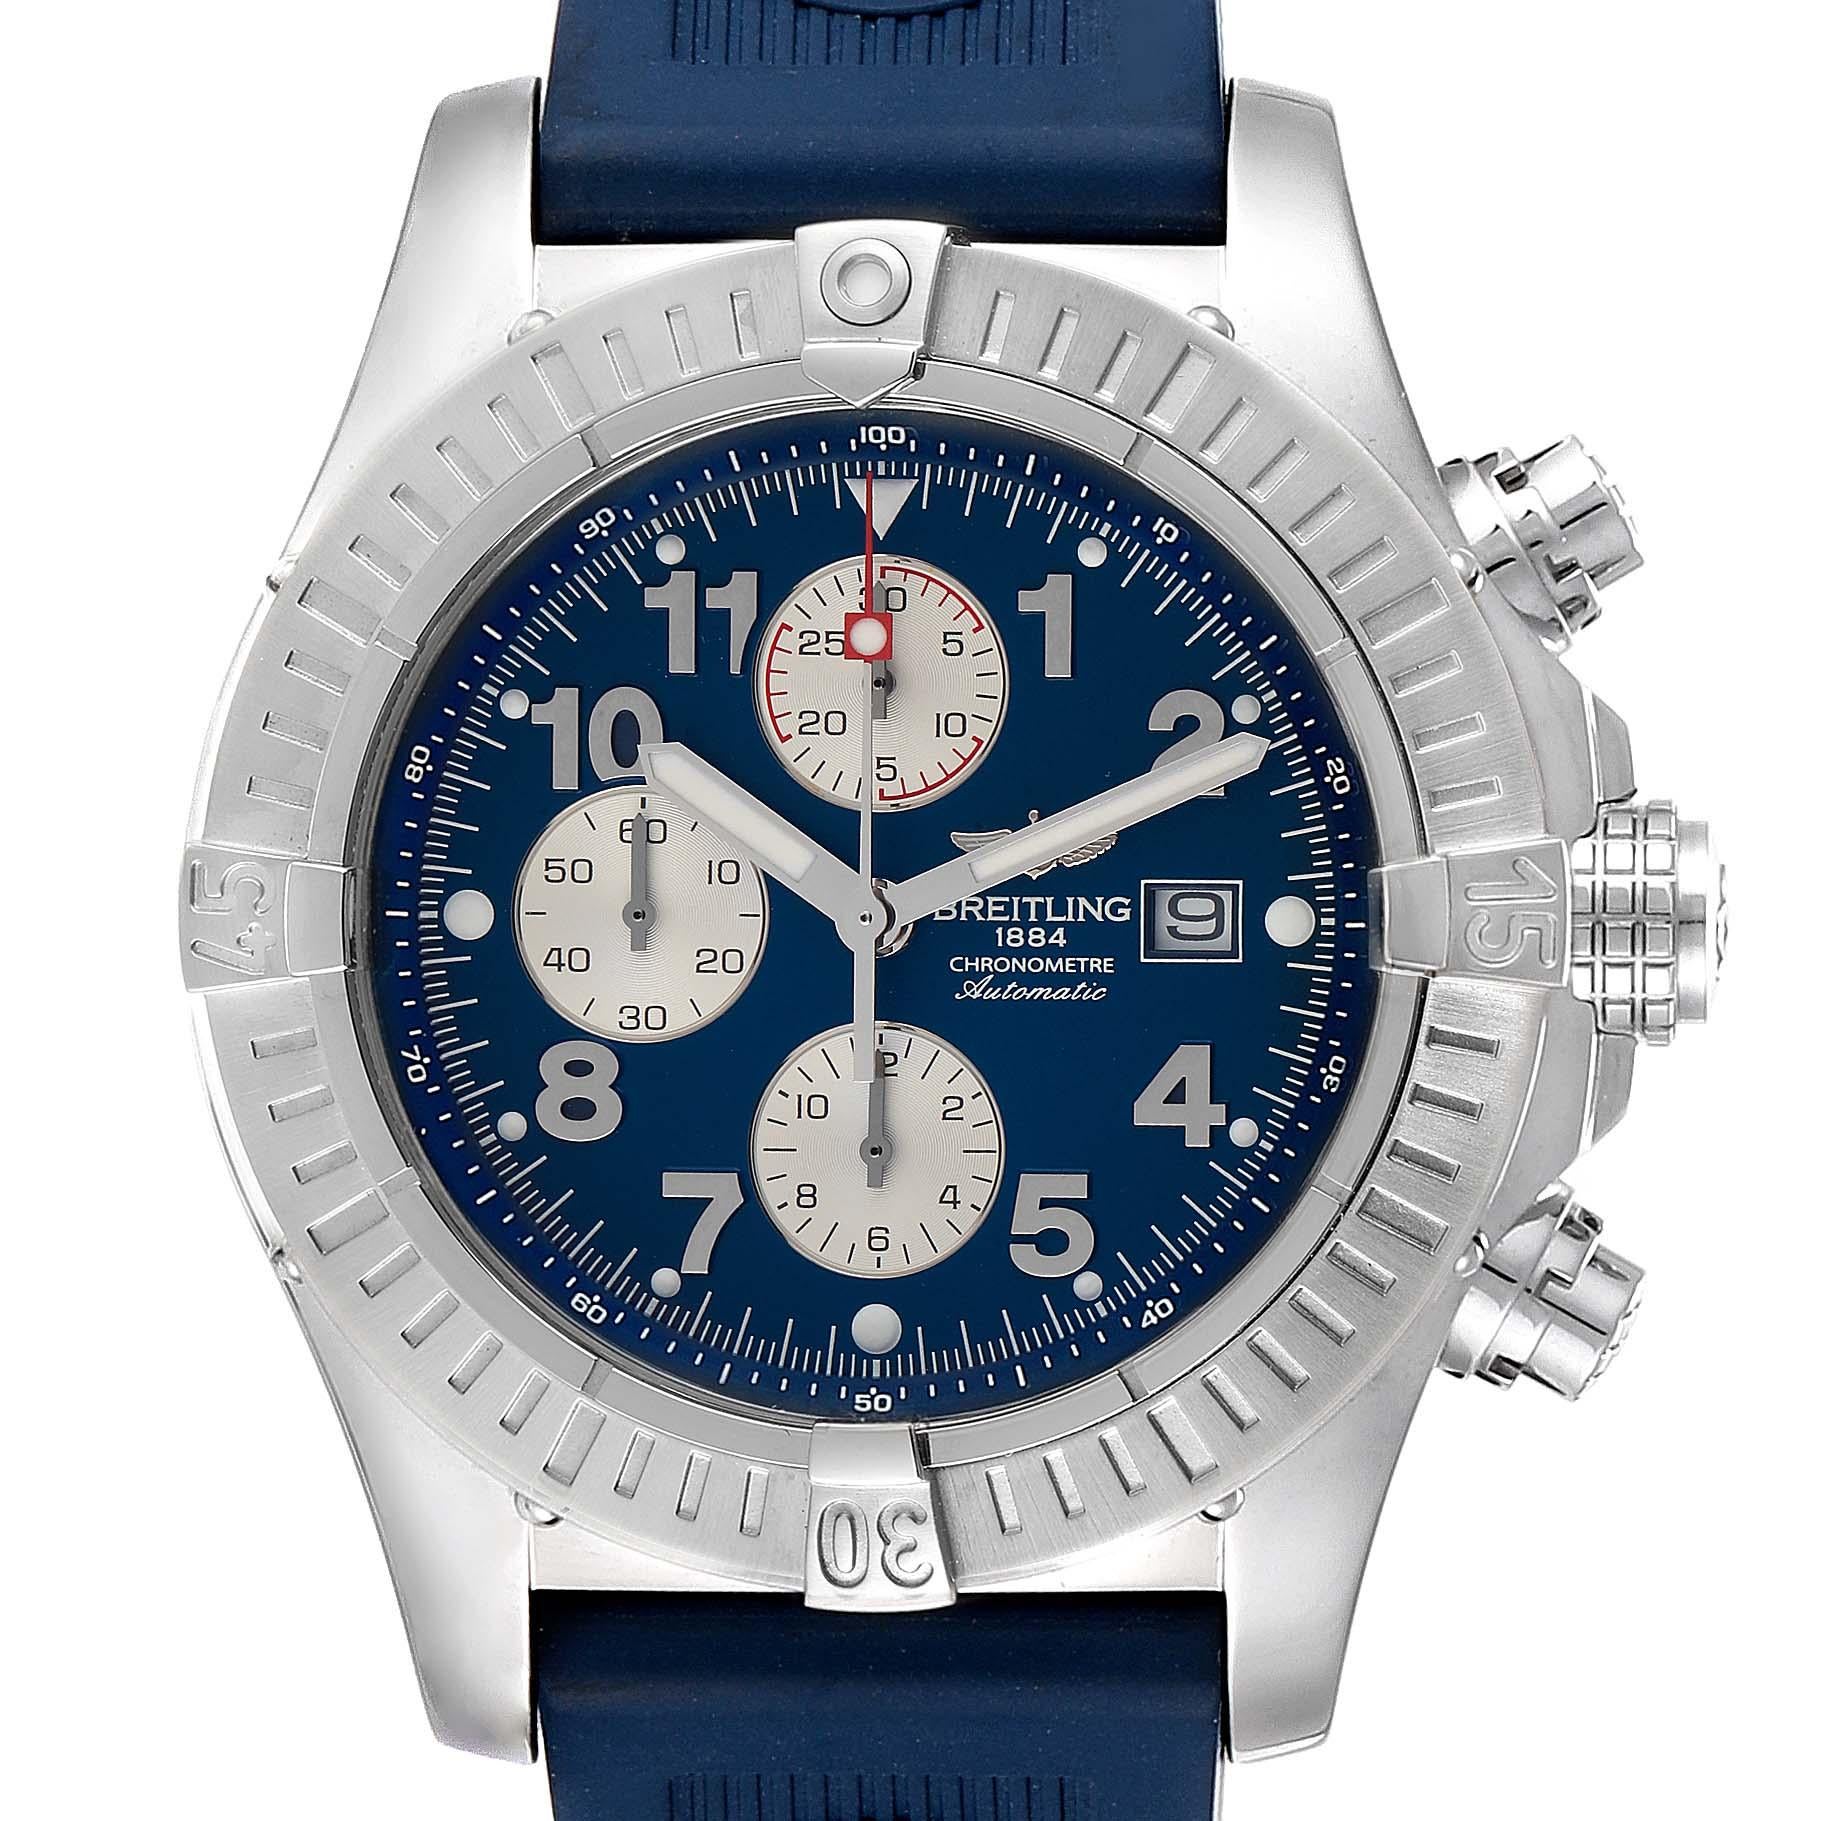 Breitling Aeromarine Super Avenger White Dial Rubber Strap Watch A13370. Automatic self-winding movement. Chronograph function. Stainless steel case 48.4 mm in diameter with screwed-locked crown and pushers. Stainless steel unidirectional rotating